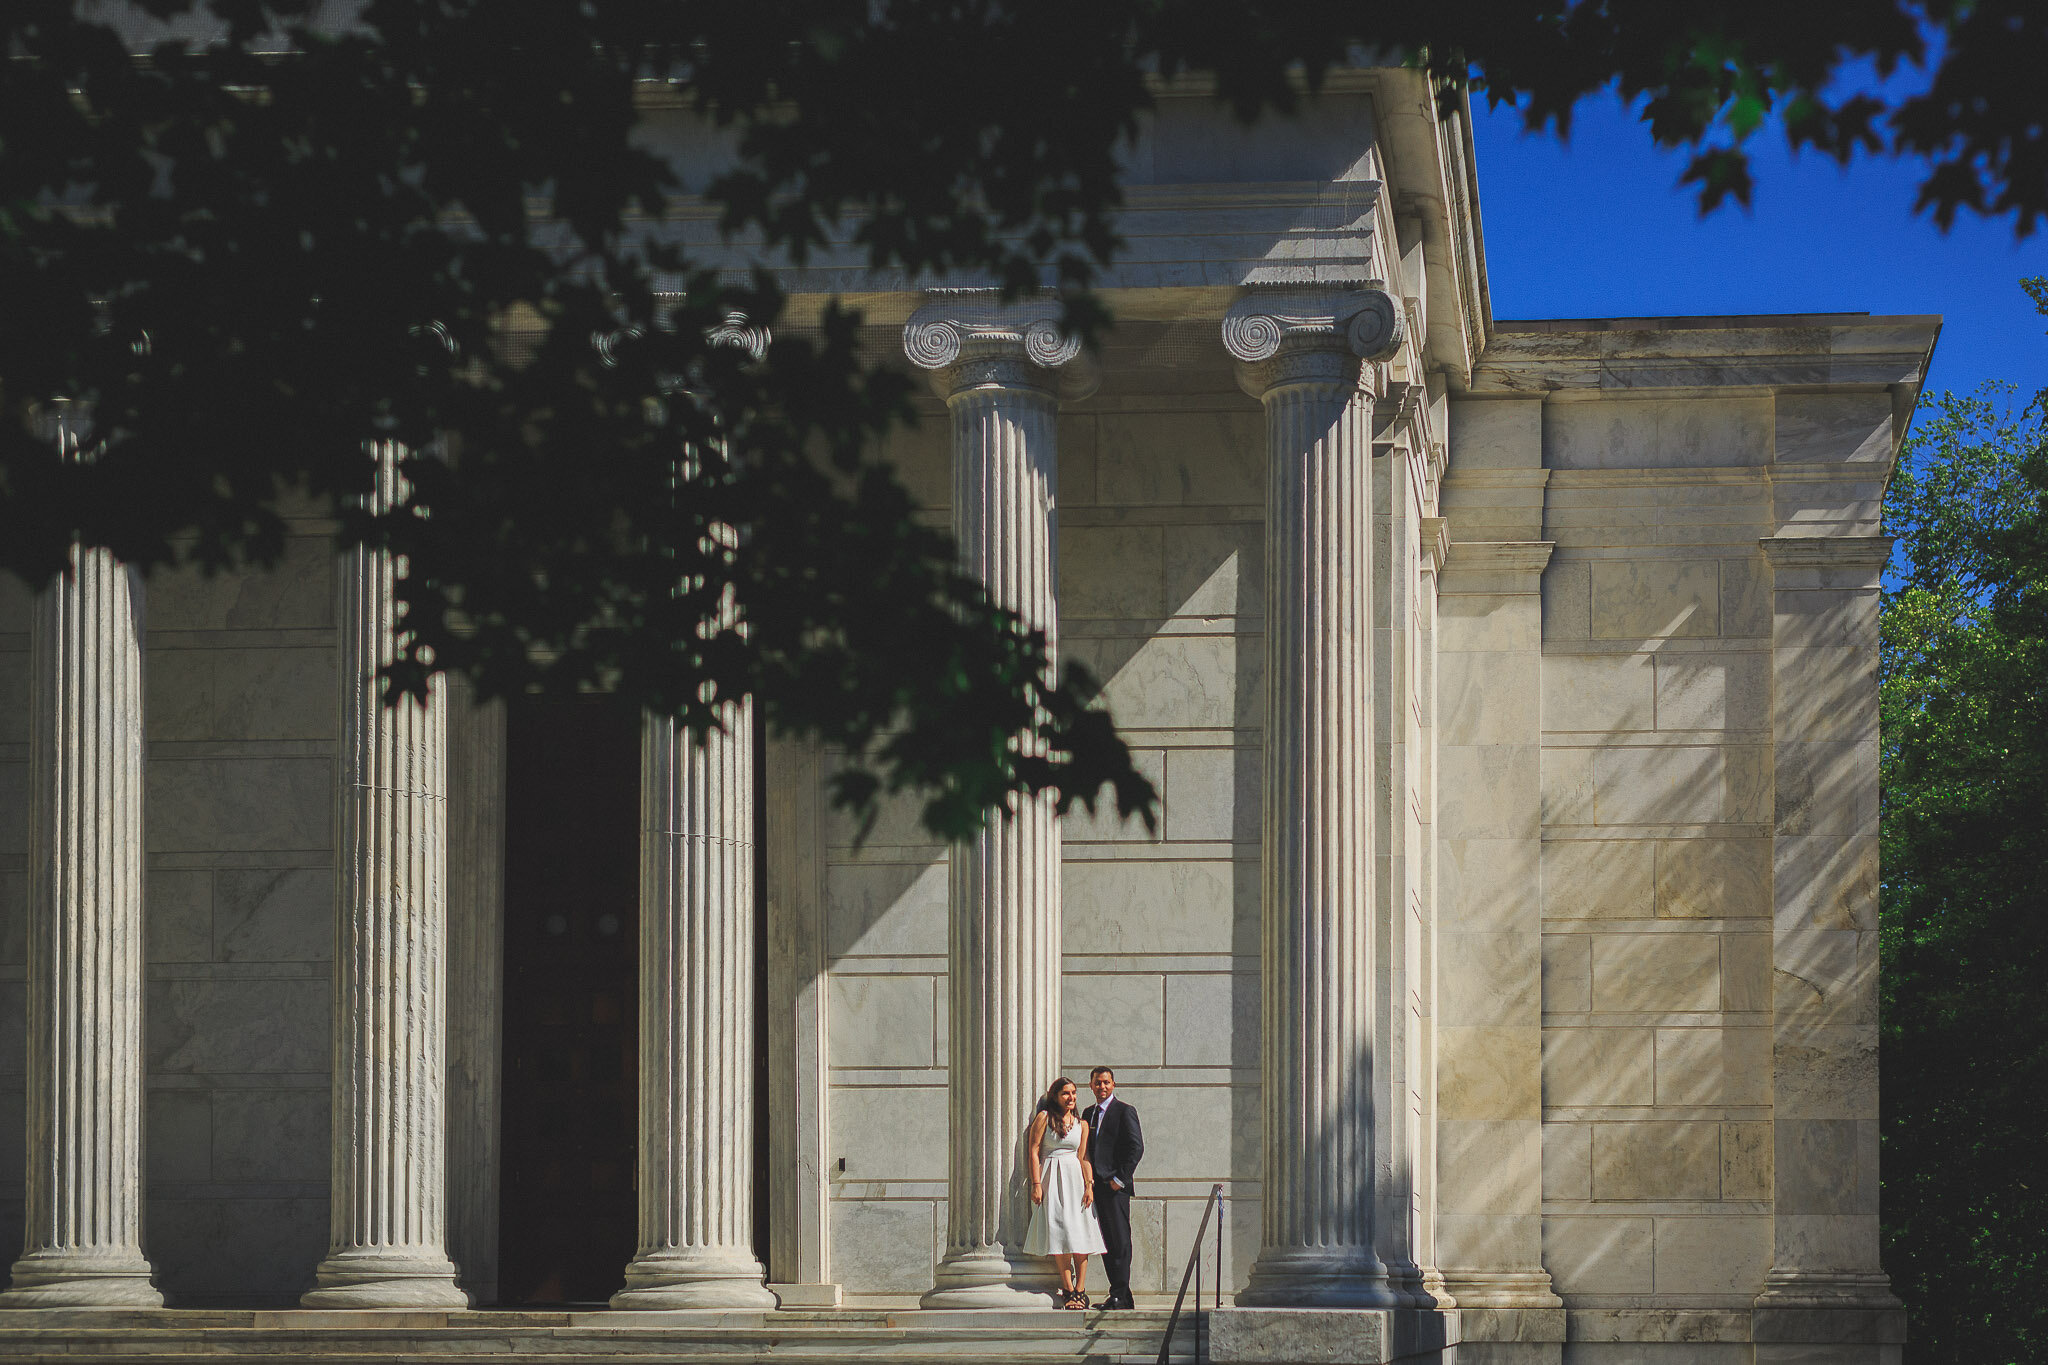 PRINCETON UNIVERSITY AND PLAINSBORO HIGH SCHOOL NORTH ENGAGEMENT PHOTO SESSION Photographed by Top Indian Wedding Photographer Manish and Sung Photography.